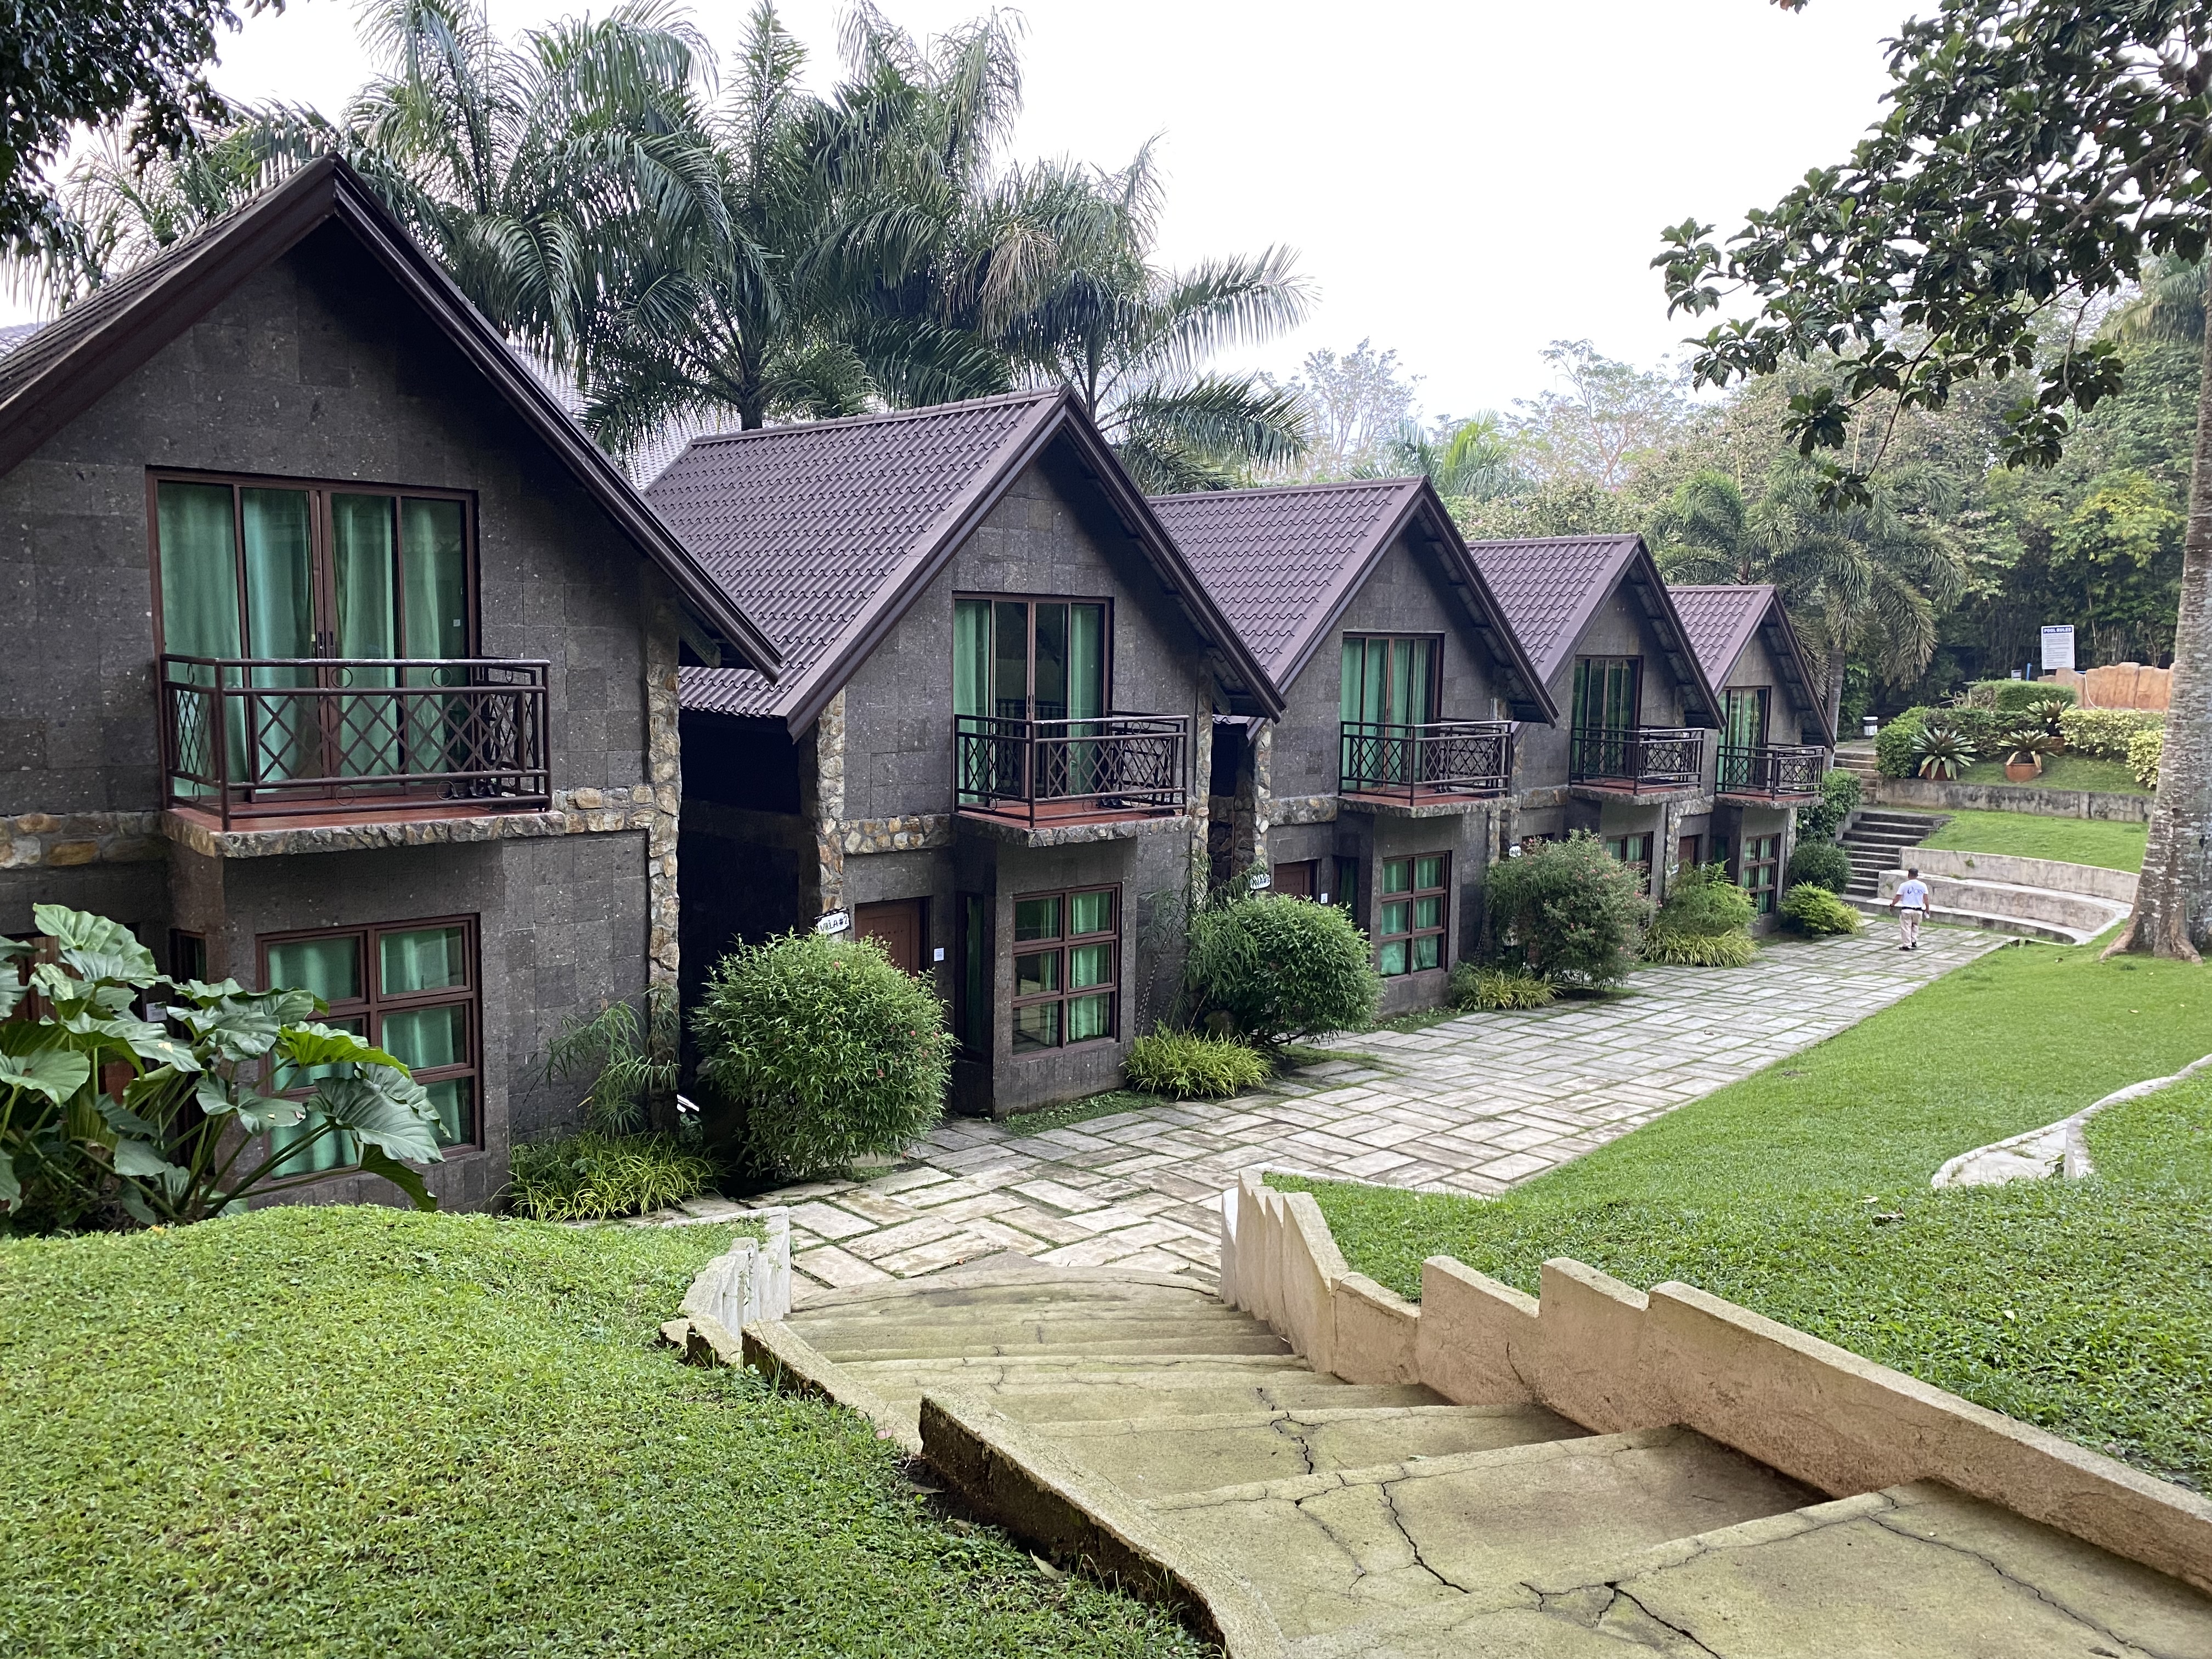 Picture of a place: Shercon Resort and Ecology Park